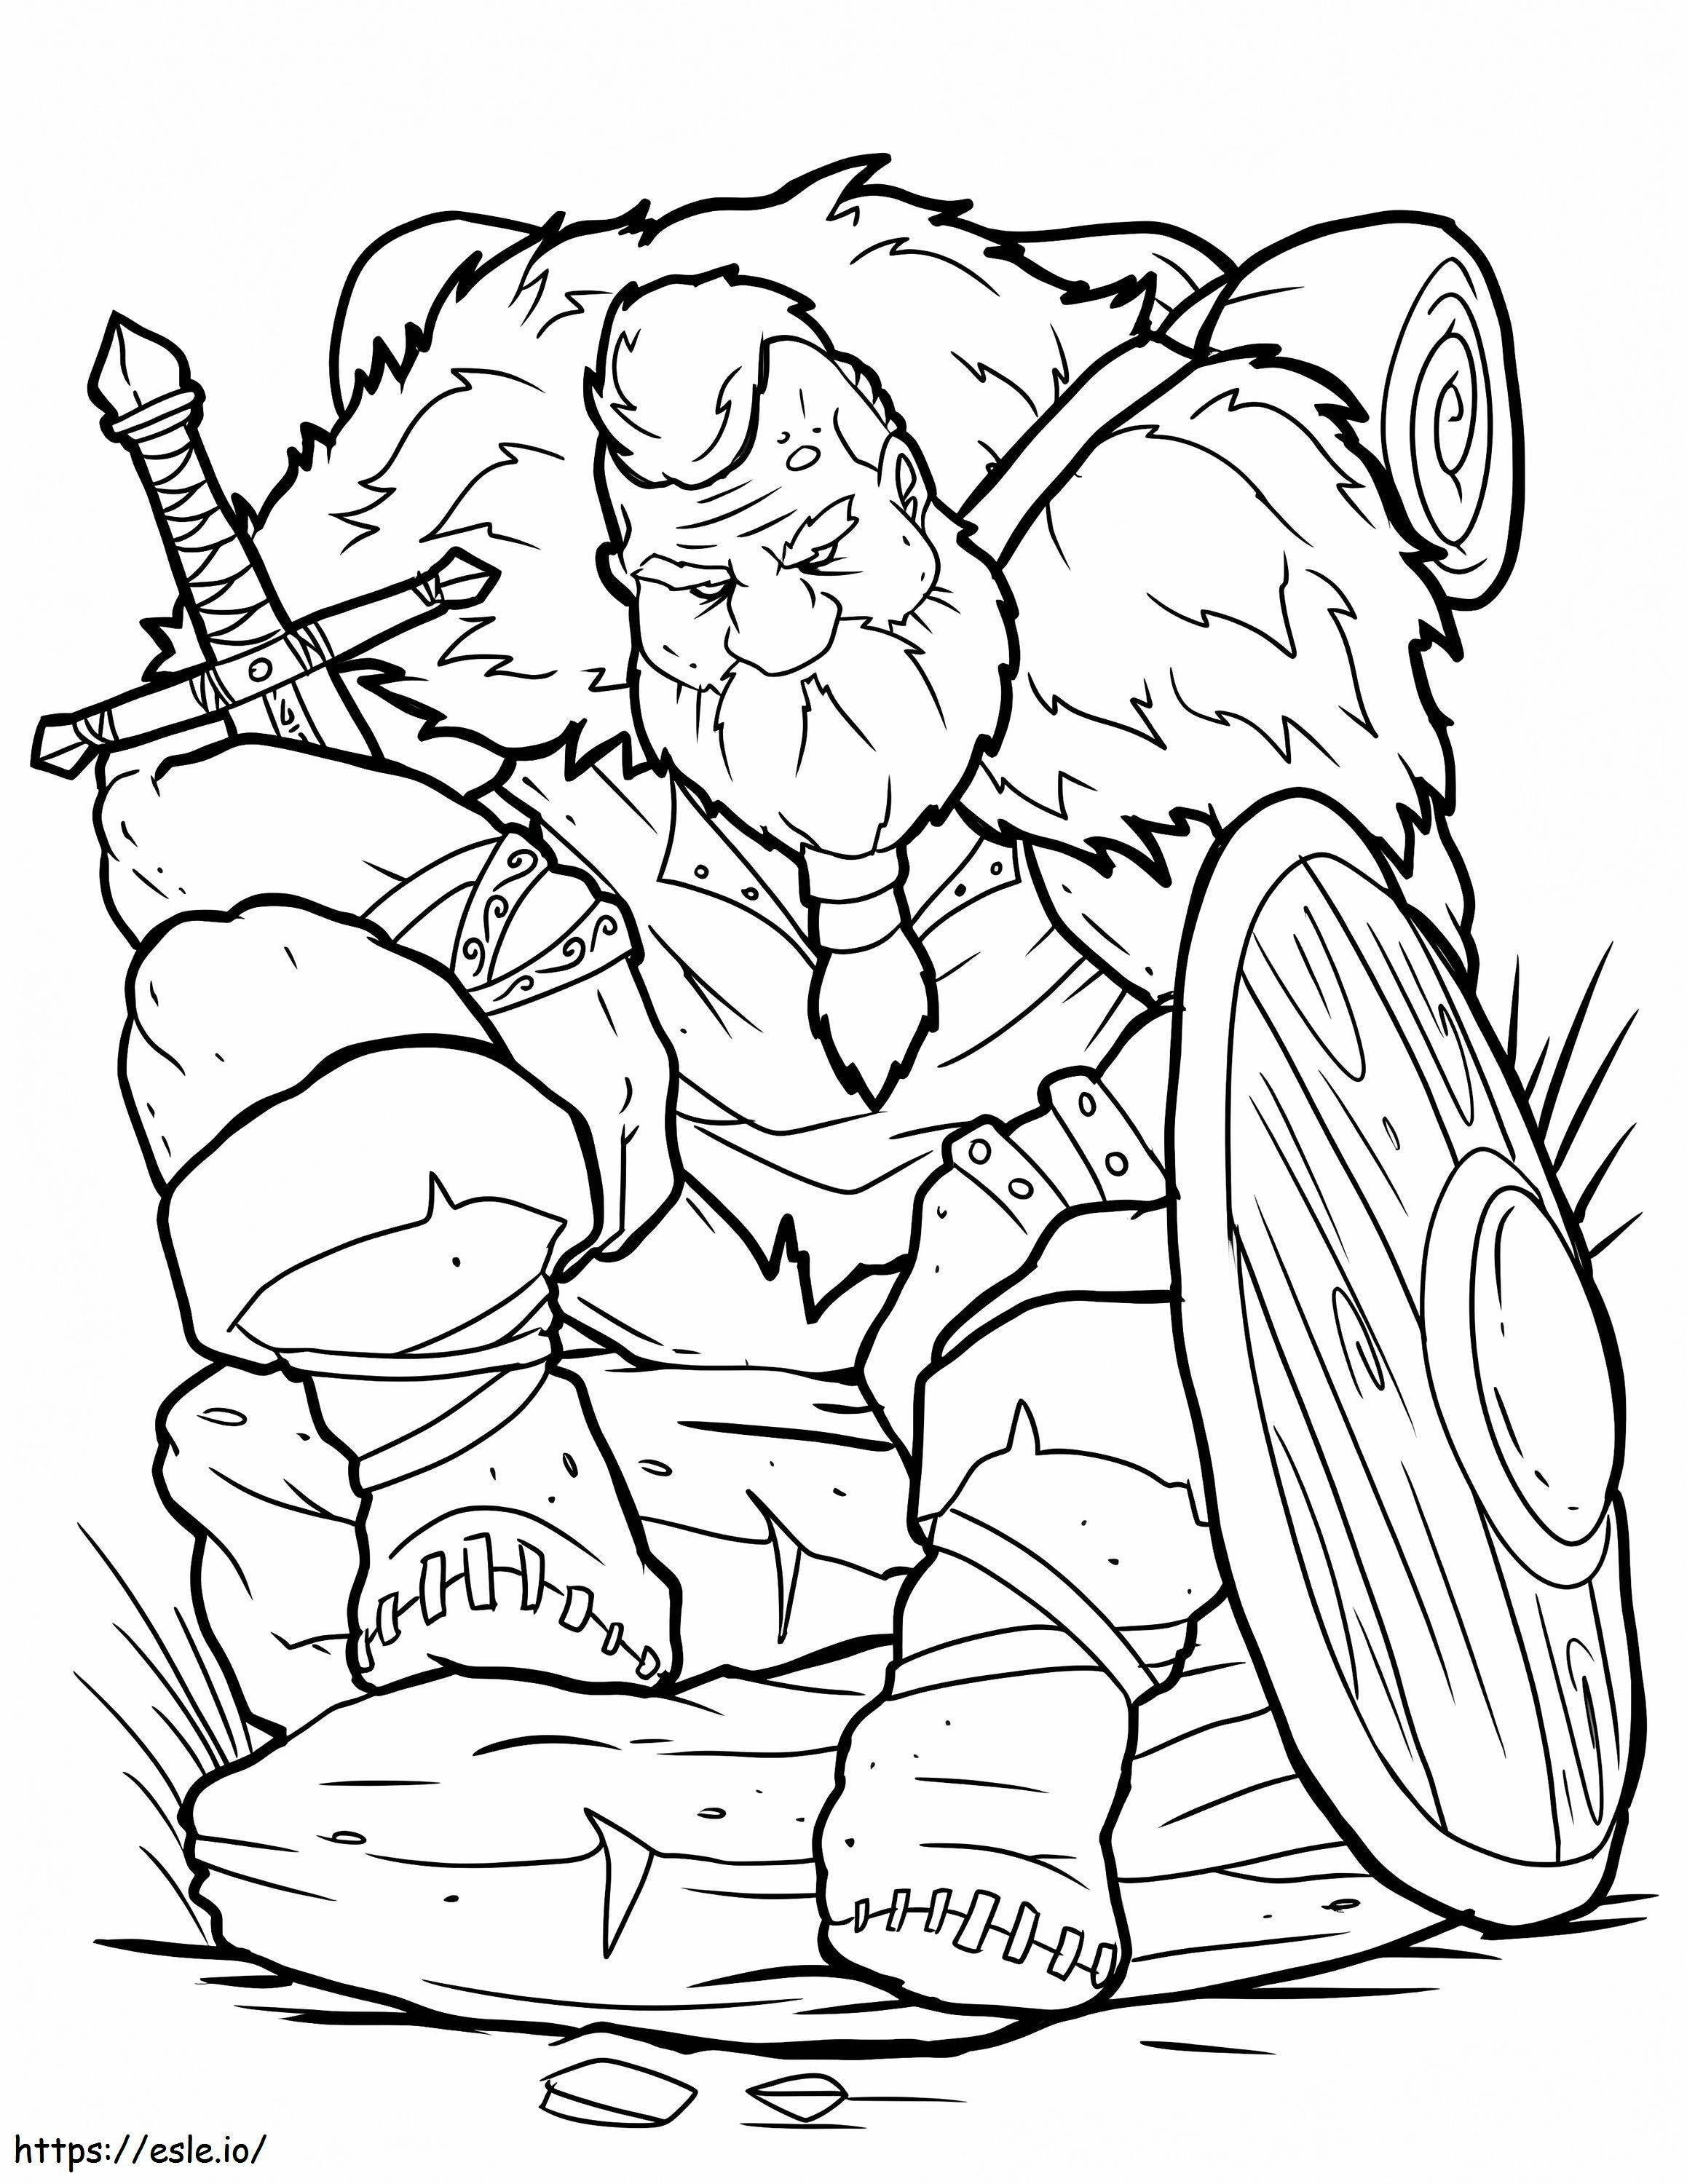 Viking With Sword And Shield coloring page